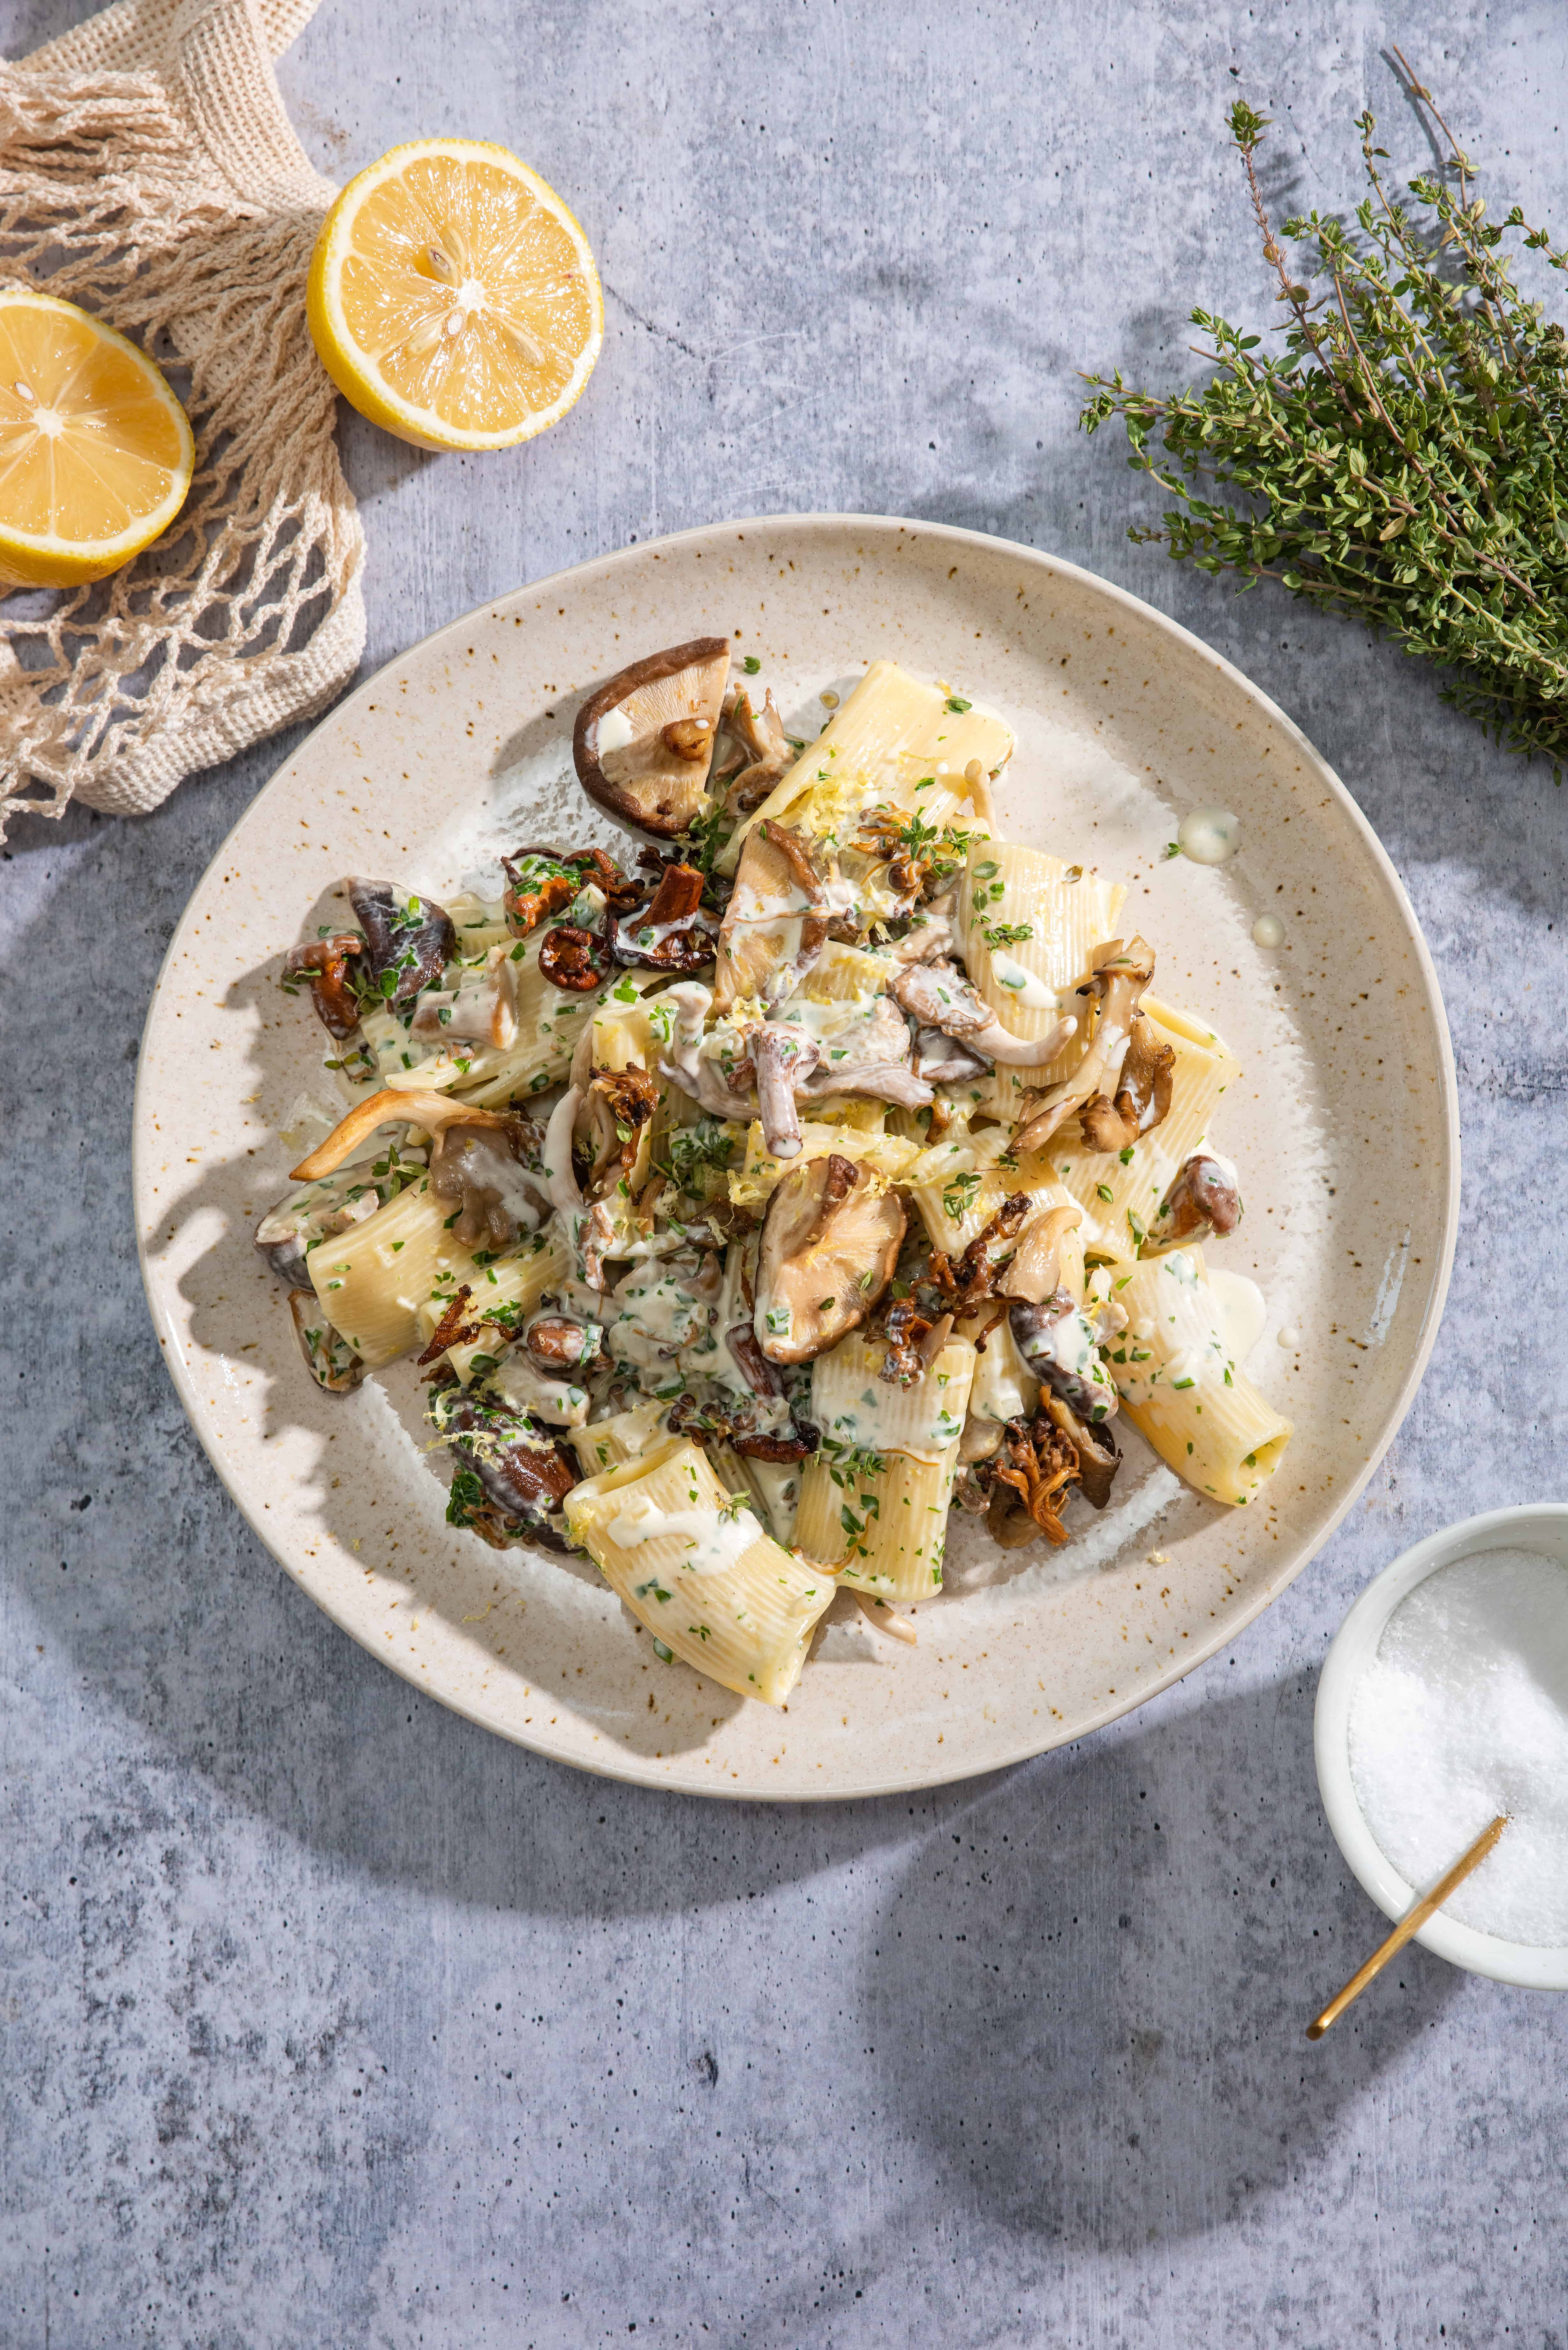 Creamy Mushroom and Garlic Pasta on a ceramic plate with lemon zest, fresh thyme and parsley